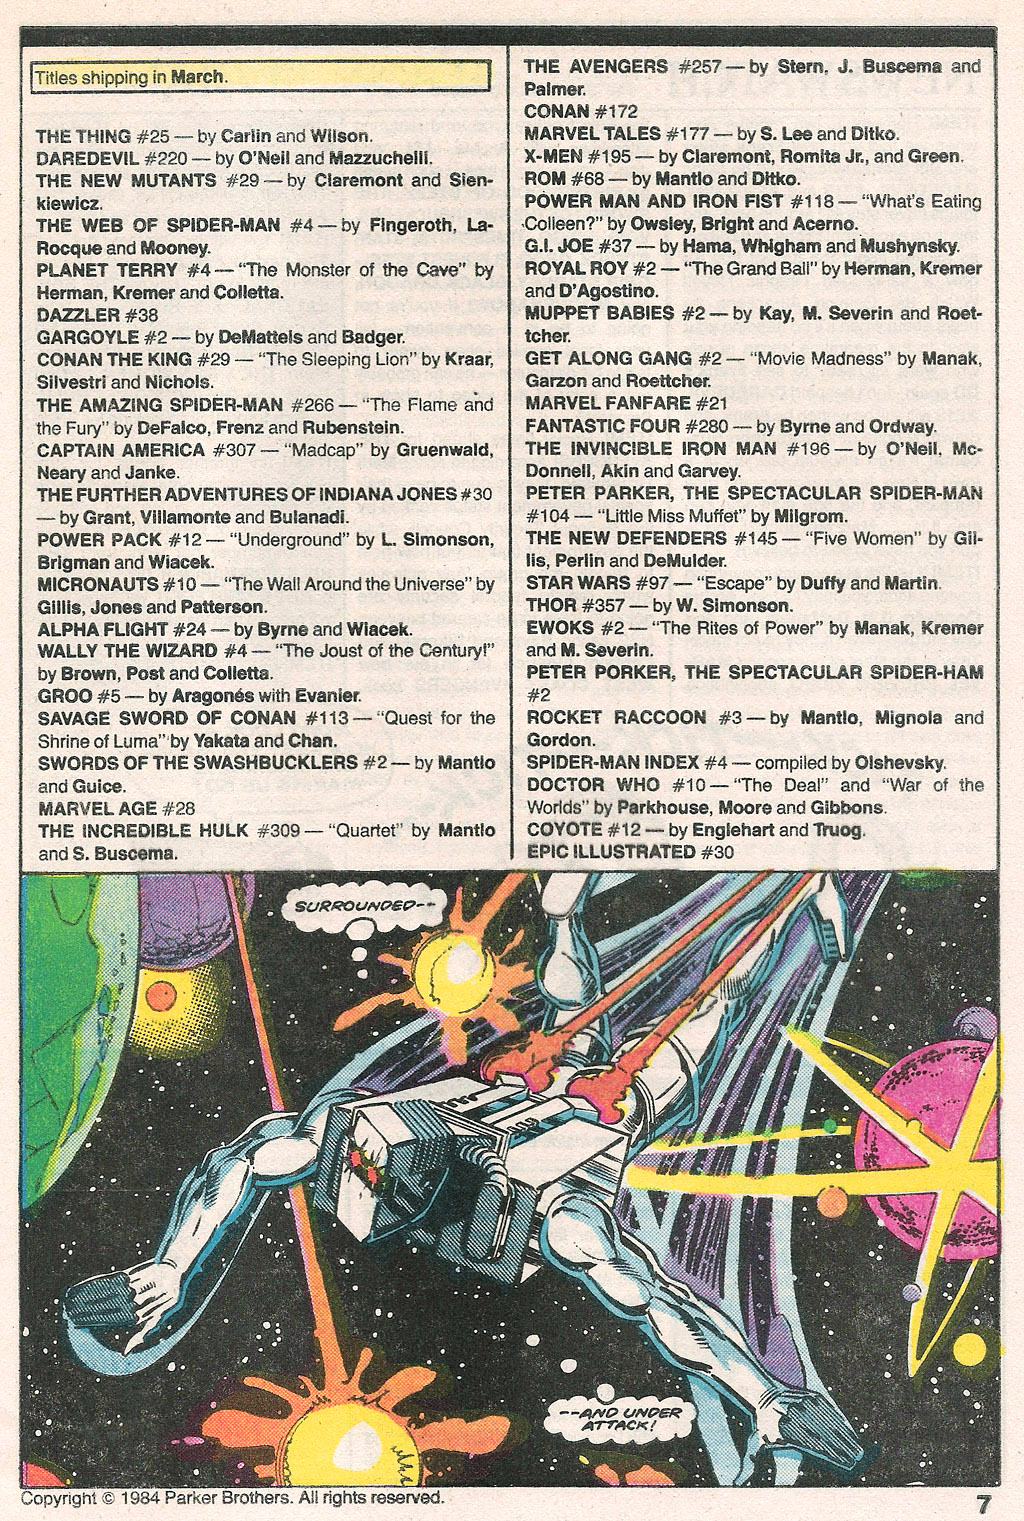 Read online Marvel Age comic -  Issue #25 - 9